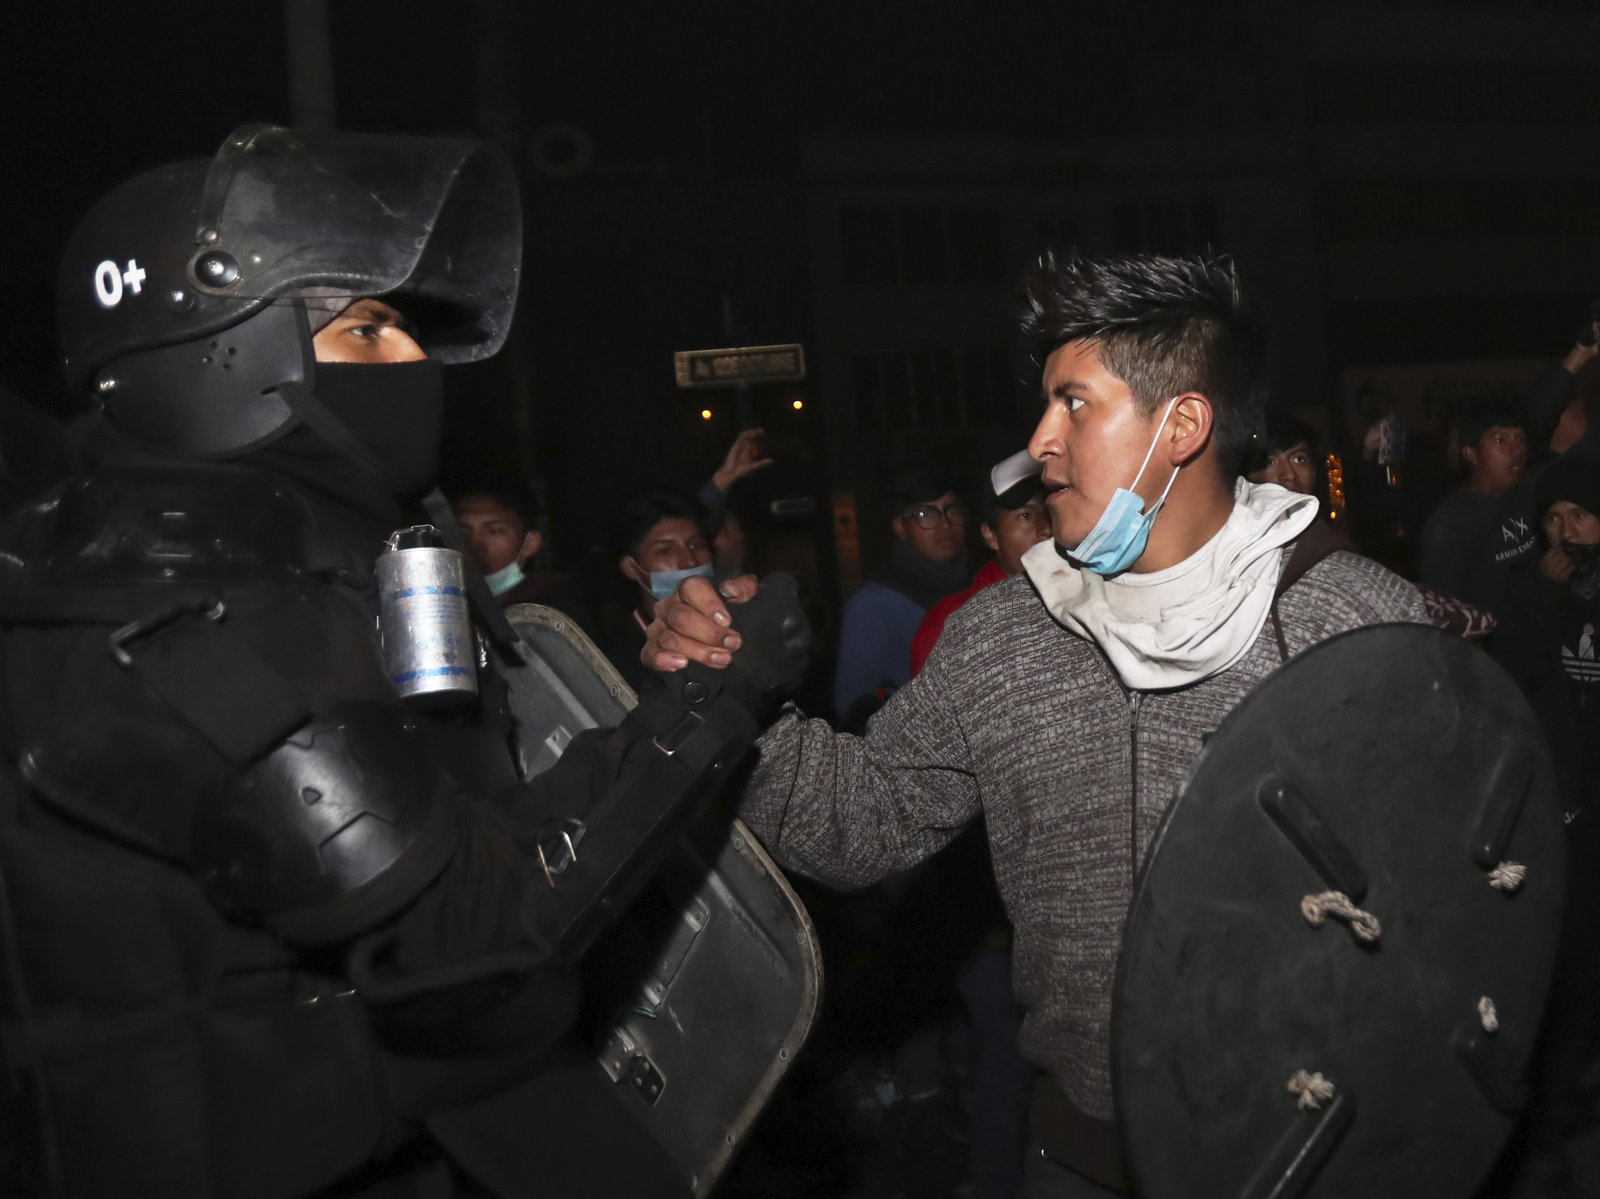 A protester shakes hands with a security officer in Quito, Ecuador, on Sunday, 13 October 2019, as they celebrate the government’s announcement that it has cancelled an austerity package and restored fuel subsidies. The package had triggered violent protests that paralyzed the economy and left seven people dead. Photo: Dolores Ochoa / AP